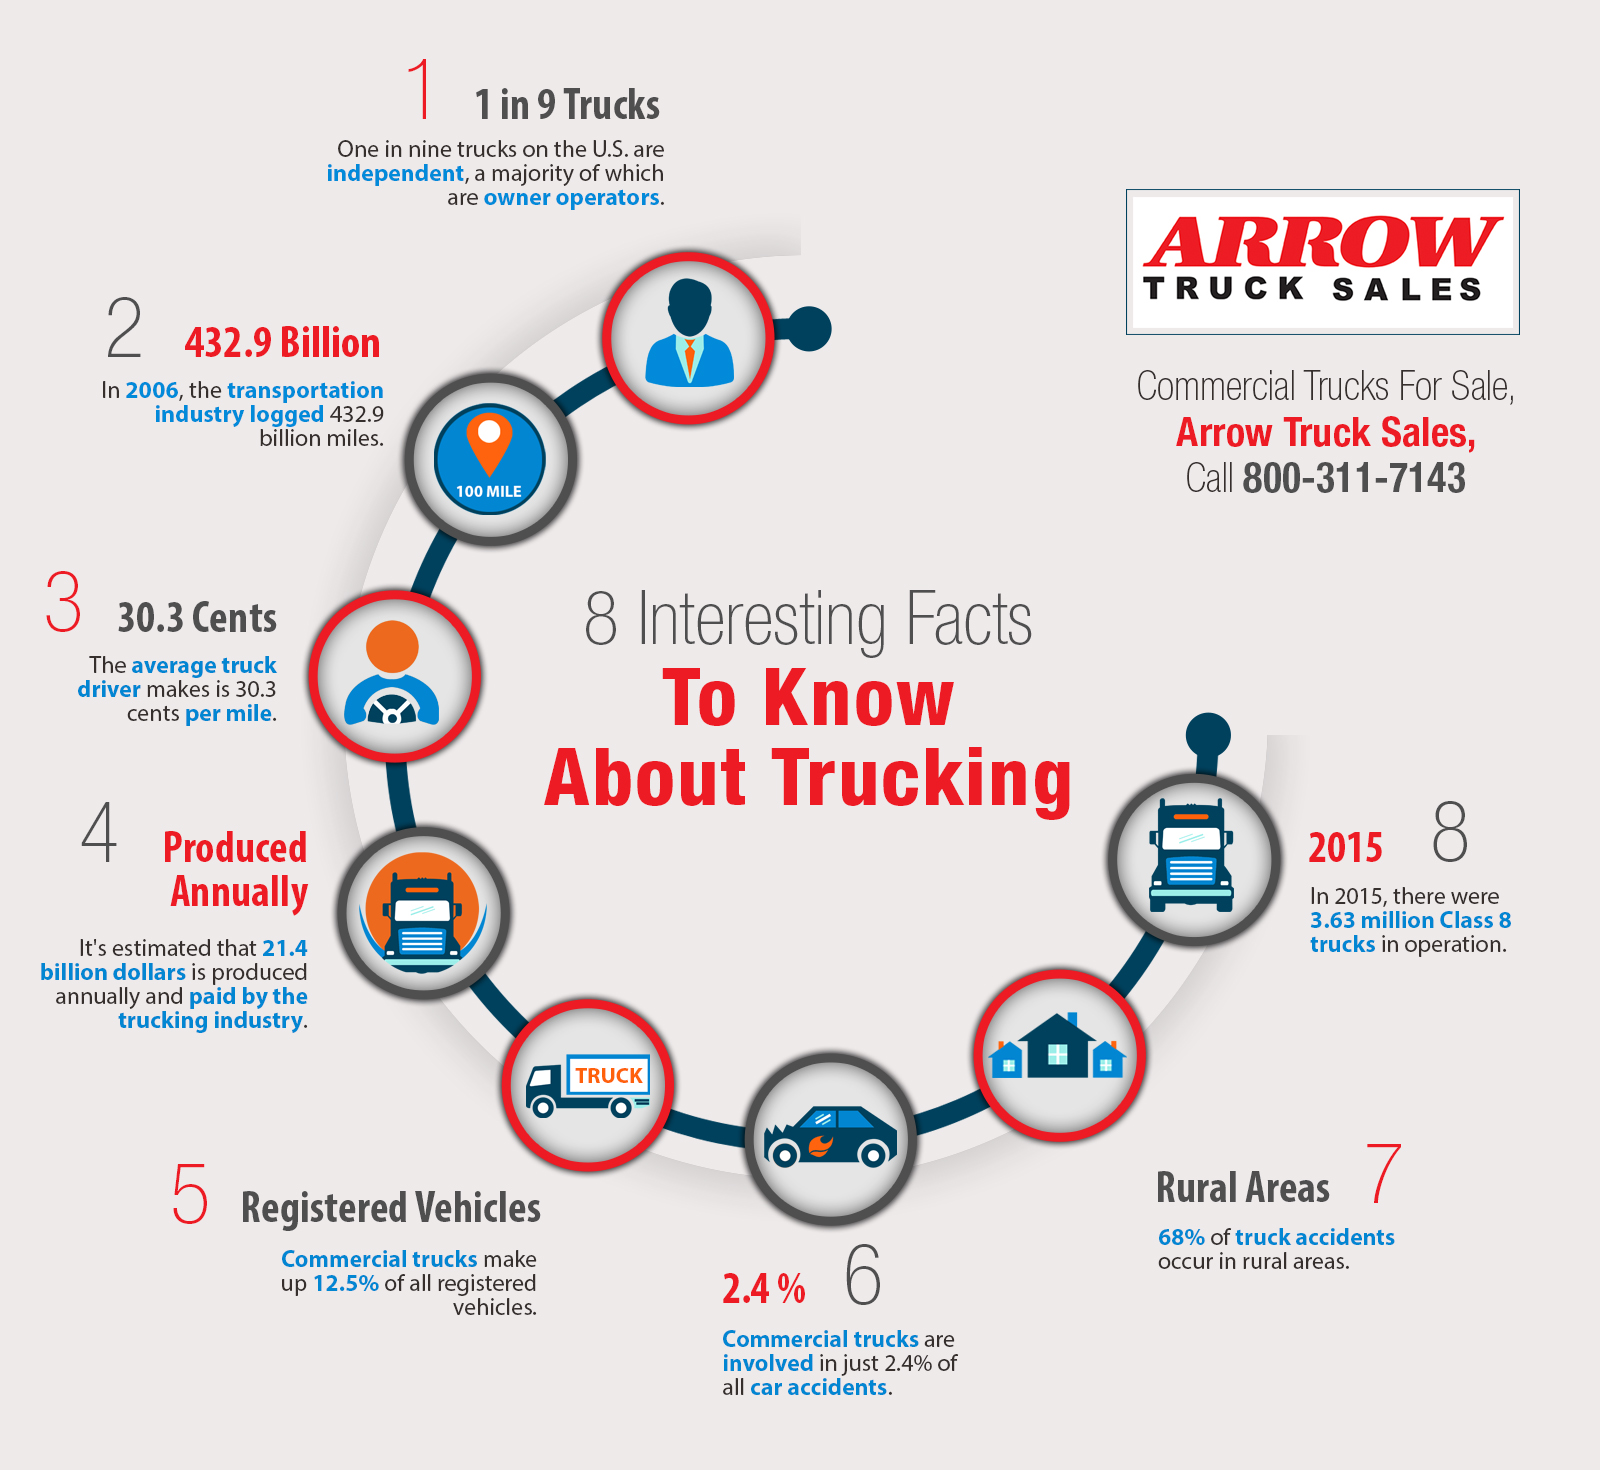 8 Interesting Facts to Know About Trucking Shared Info Graphics